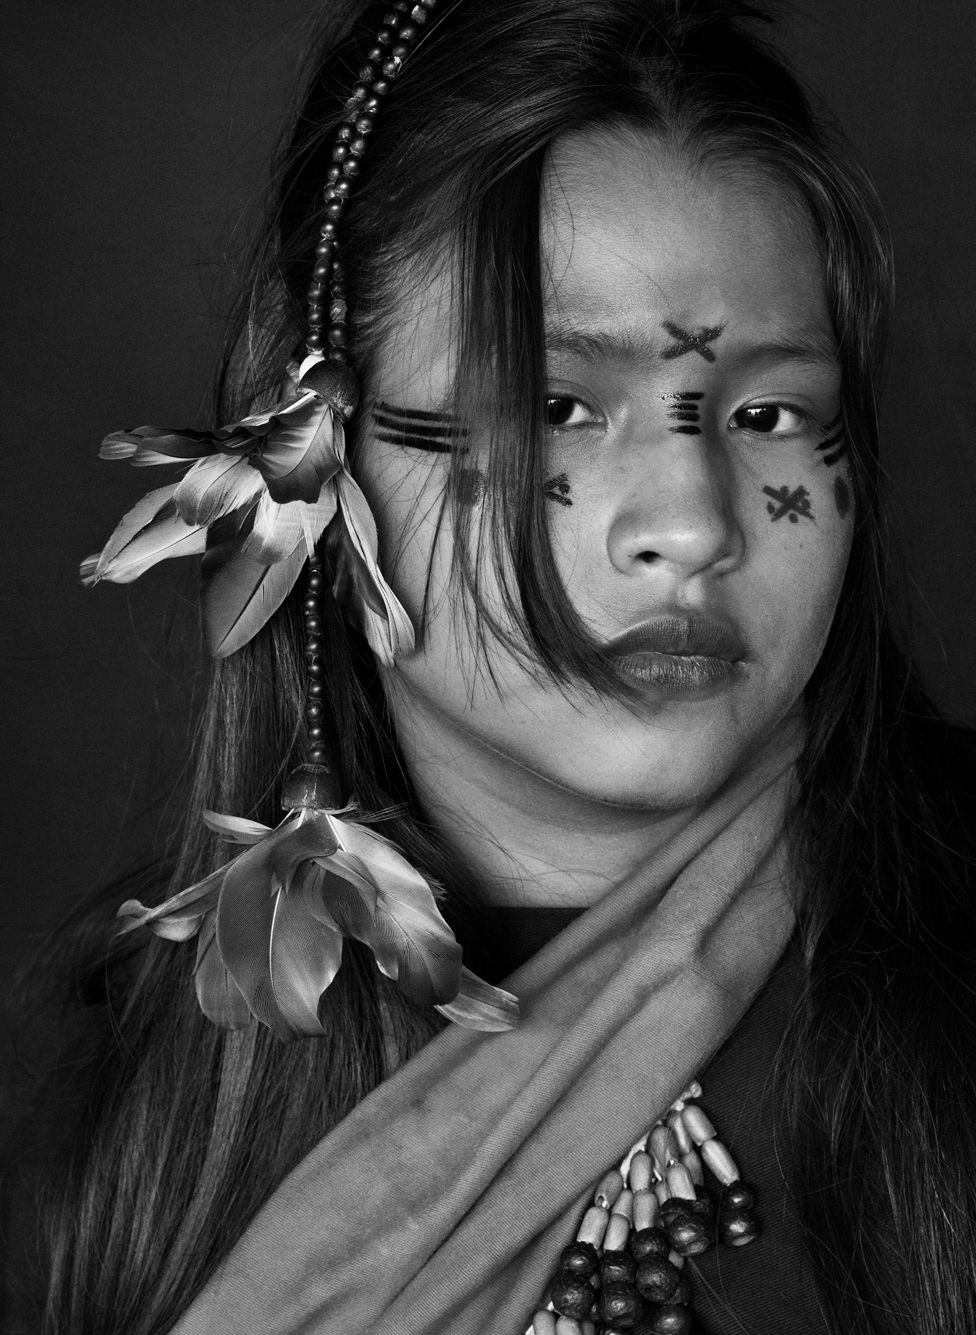 Black and white portrait of a girl with painted designs on her face